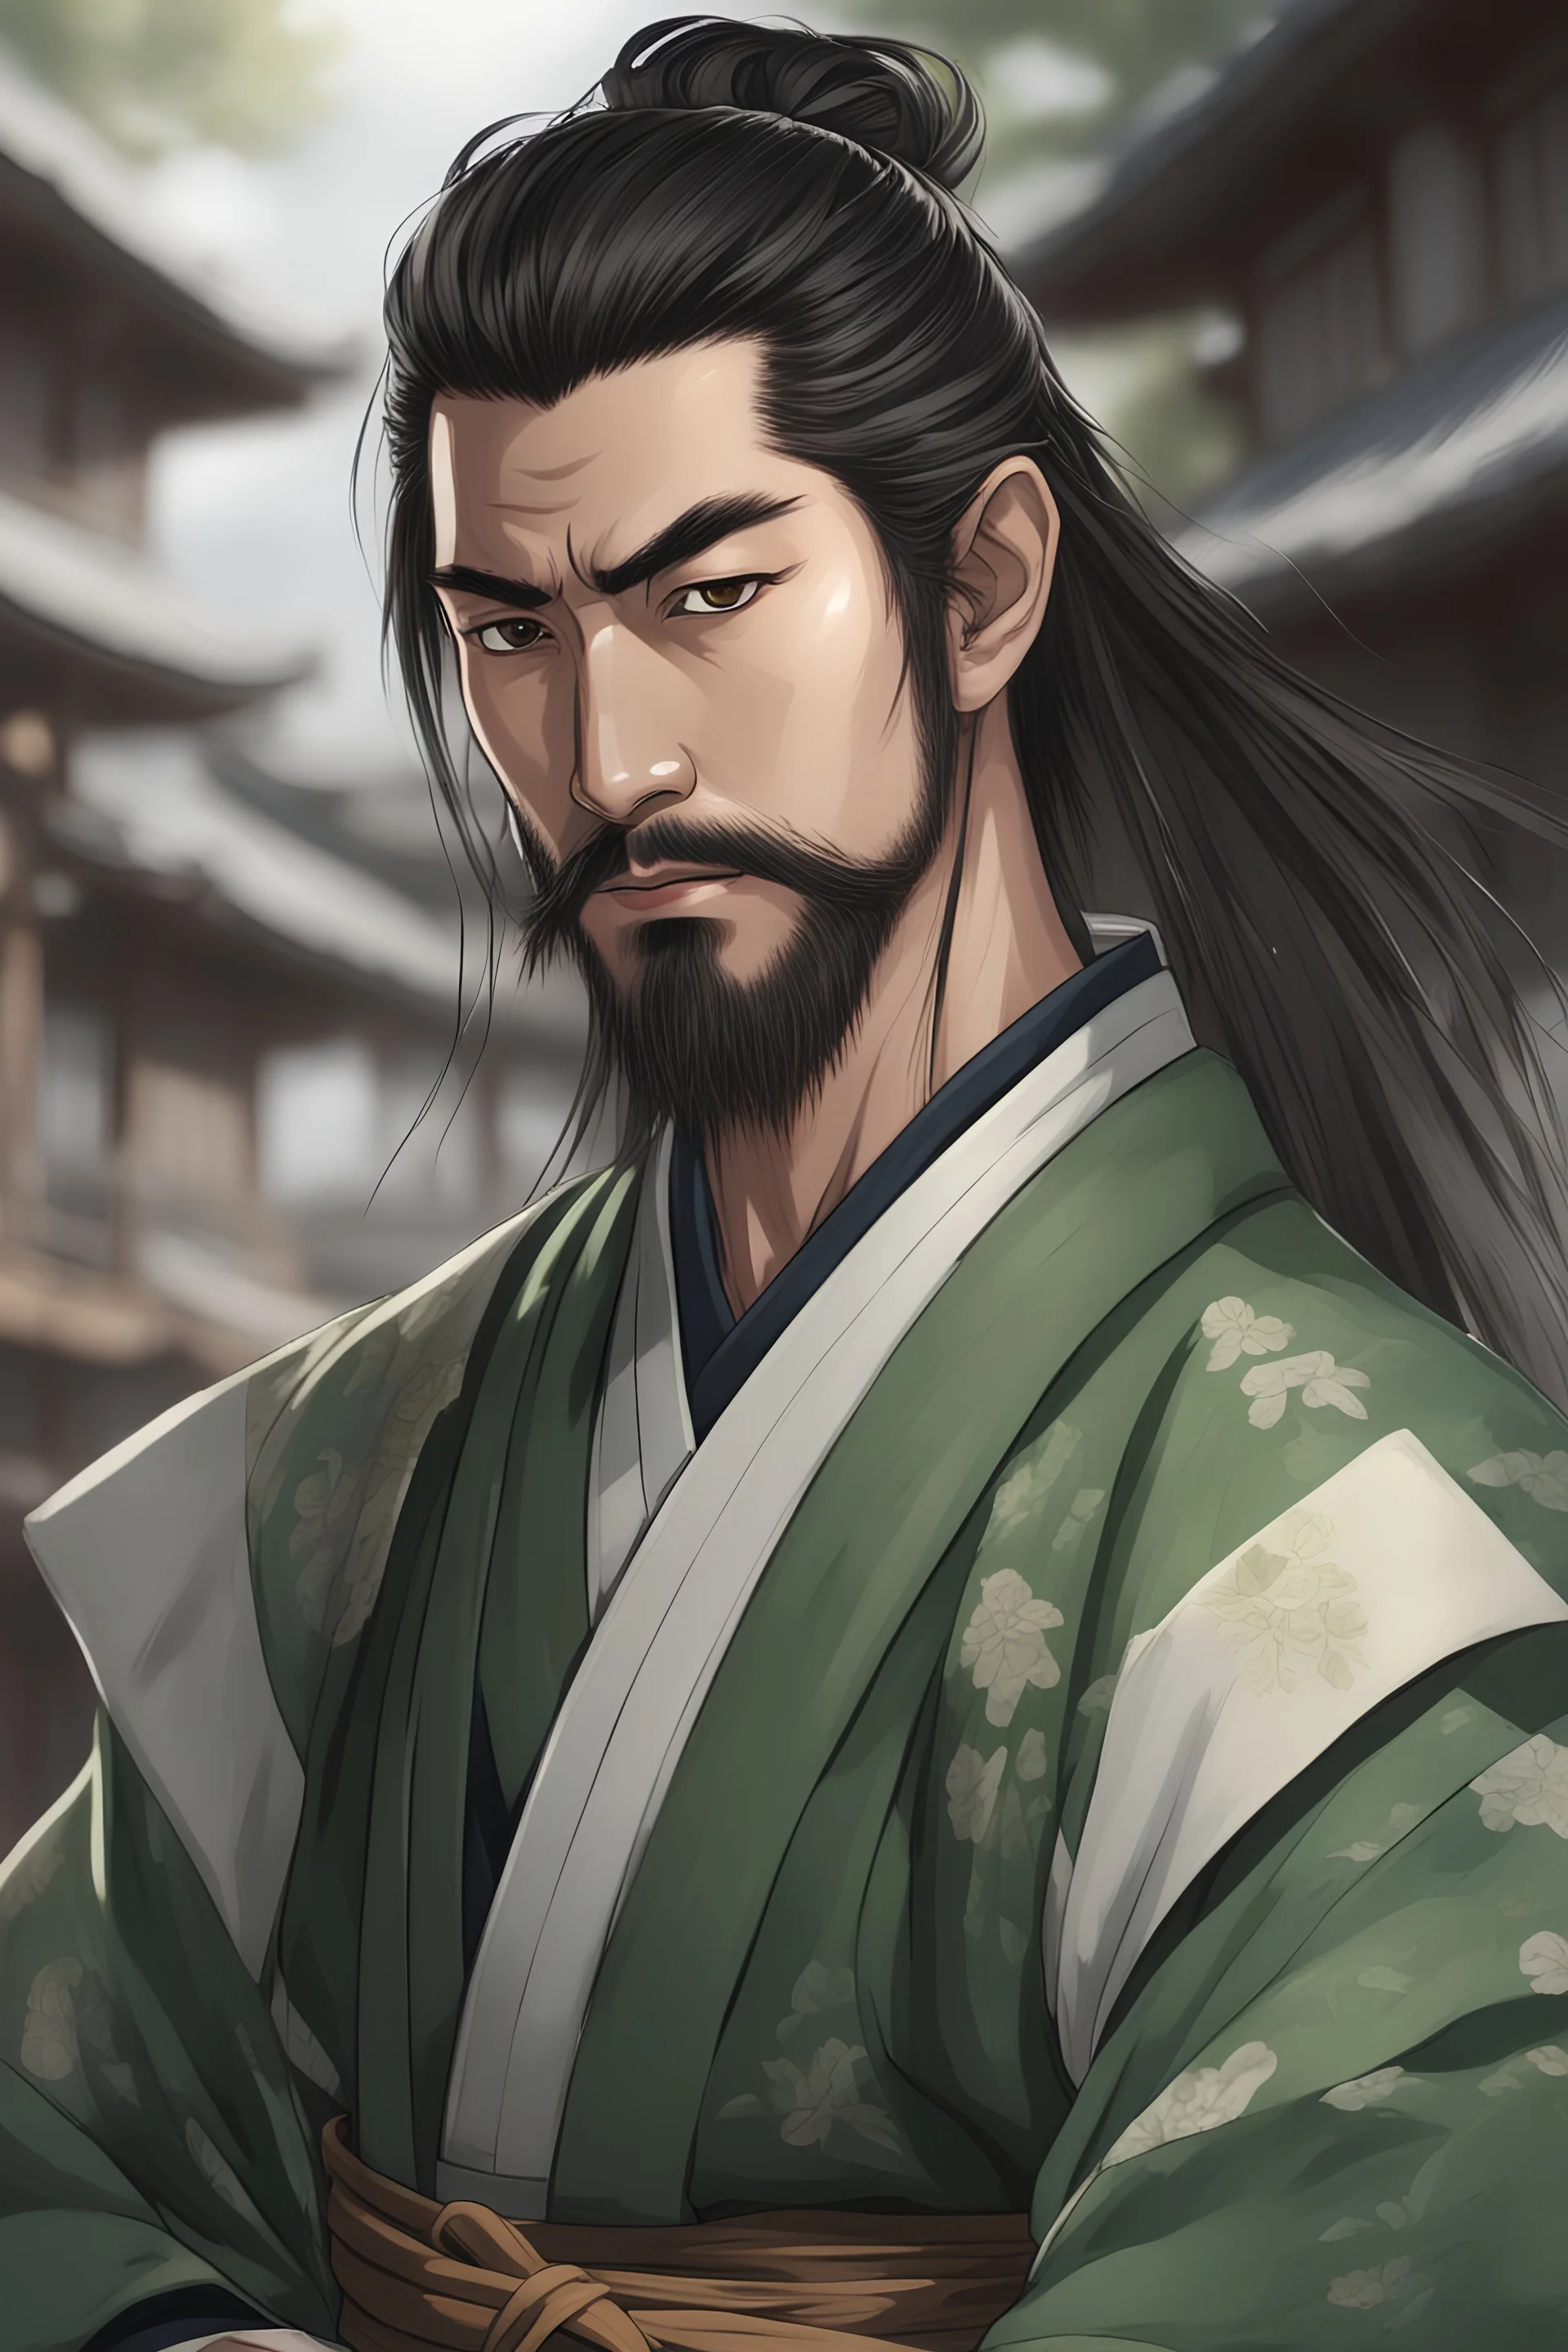 portrait of a 30 years old samurai, strong, heroic character, D&D character, bushido warrior, handsome, serious look, gentle smile, noble like, merchant, 8k resolution, long black hair, green yukata with tortoise signets, no left arm, trim beard,japanese harbor in the background